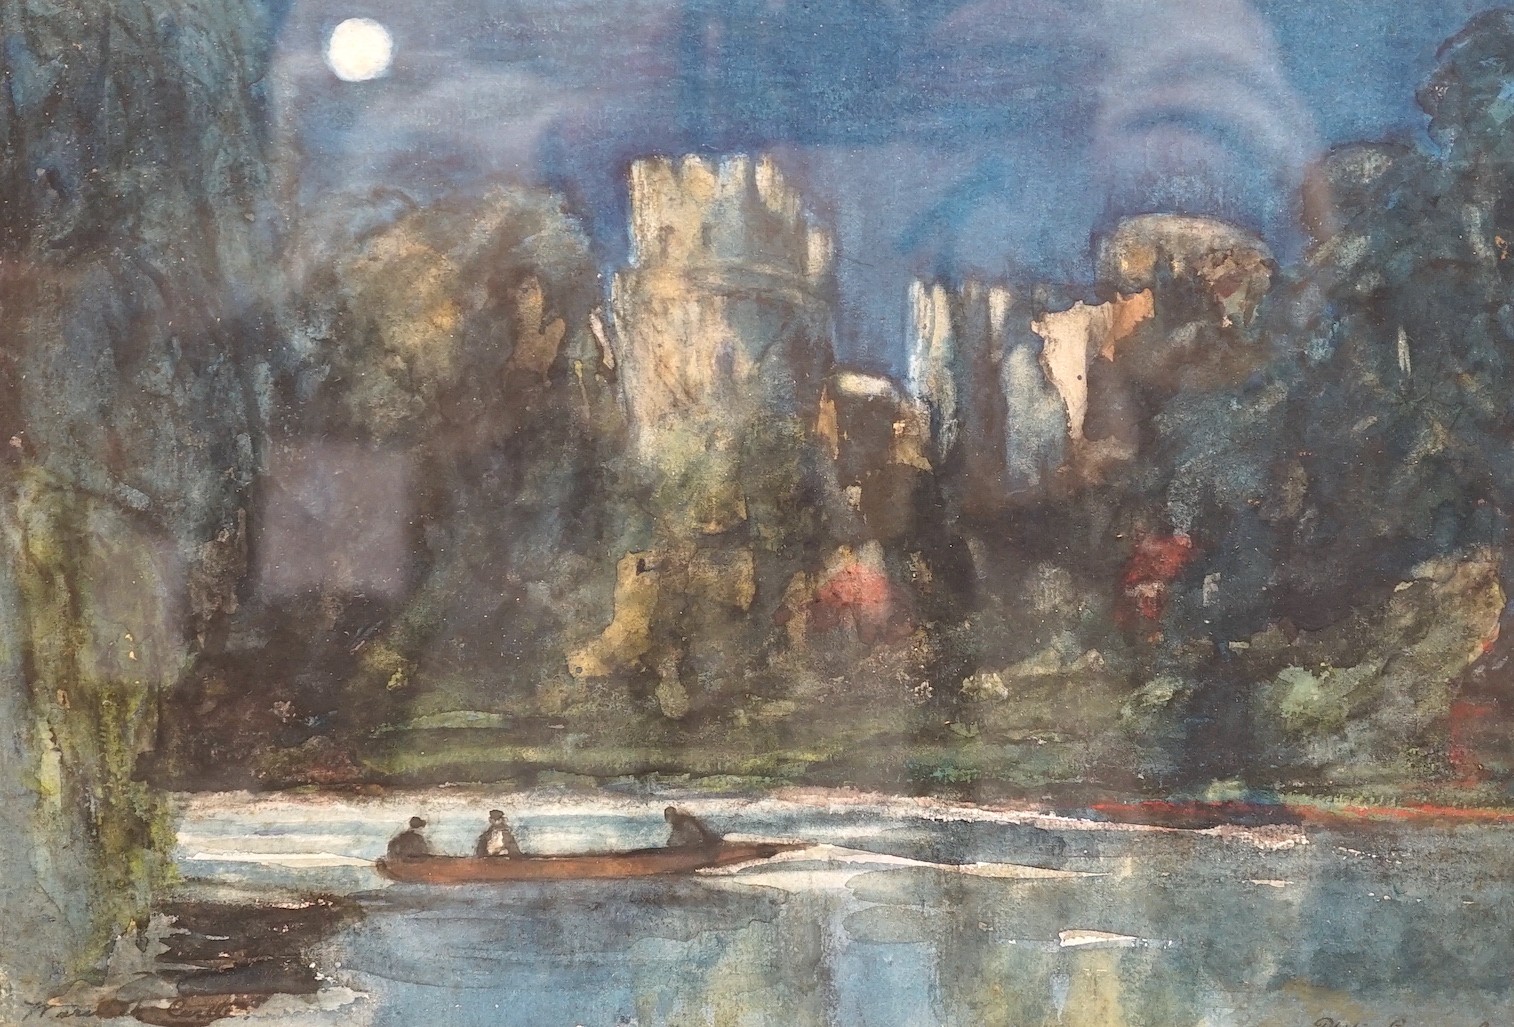 Philip Connard (1875-1958), watercolour, Moonlit scene with figures in a punt and a castle, signed, 23 x 33cm